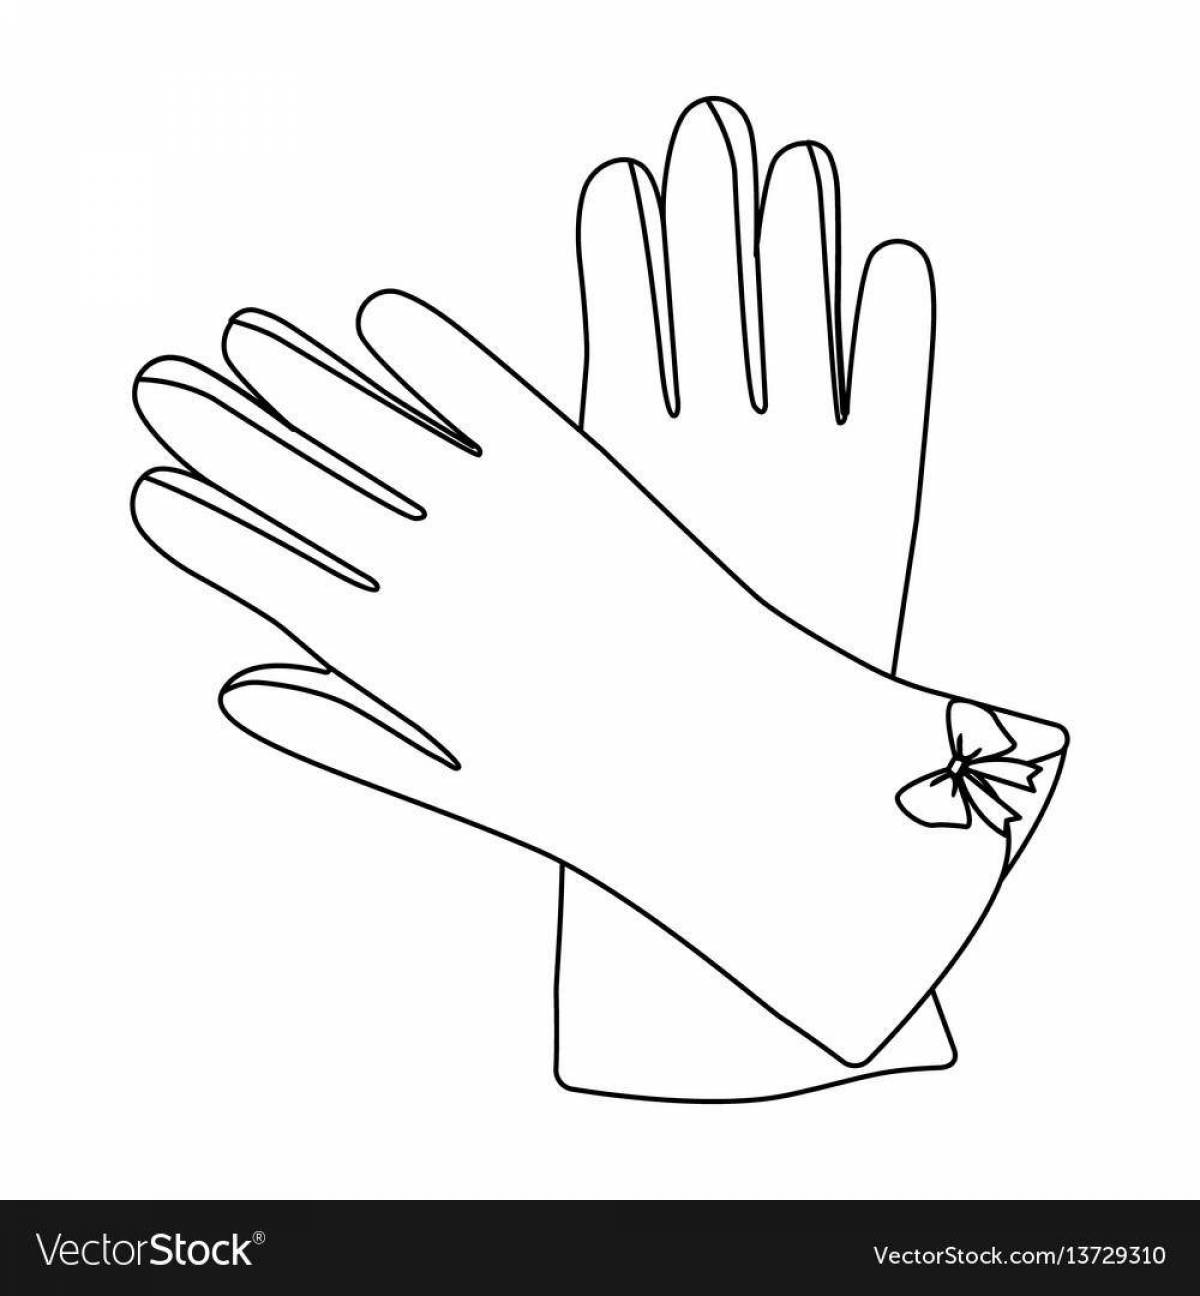 Fun coloring of gloves for kids